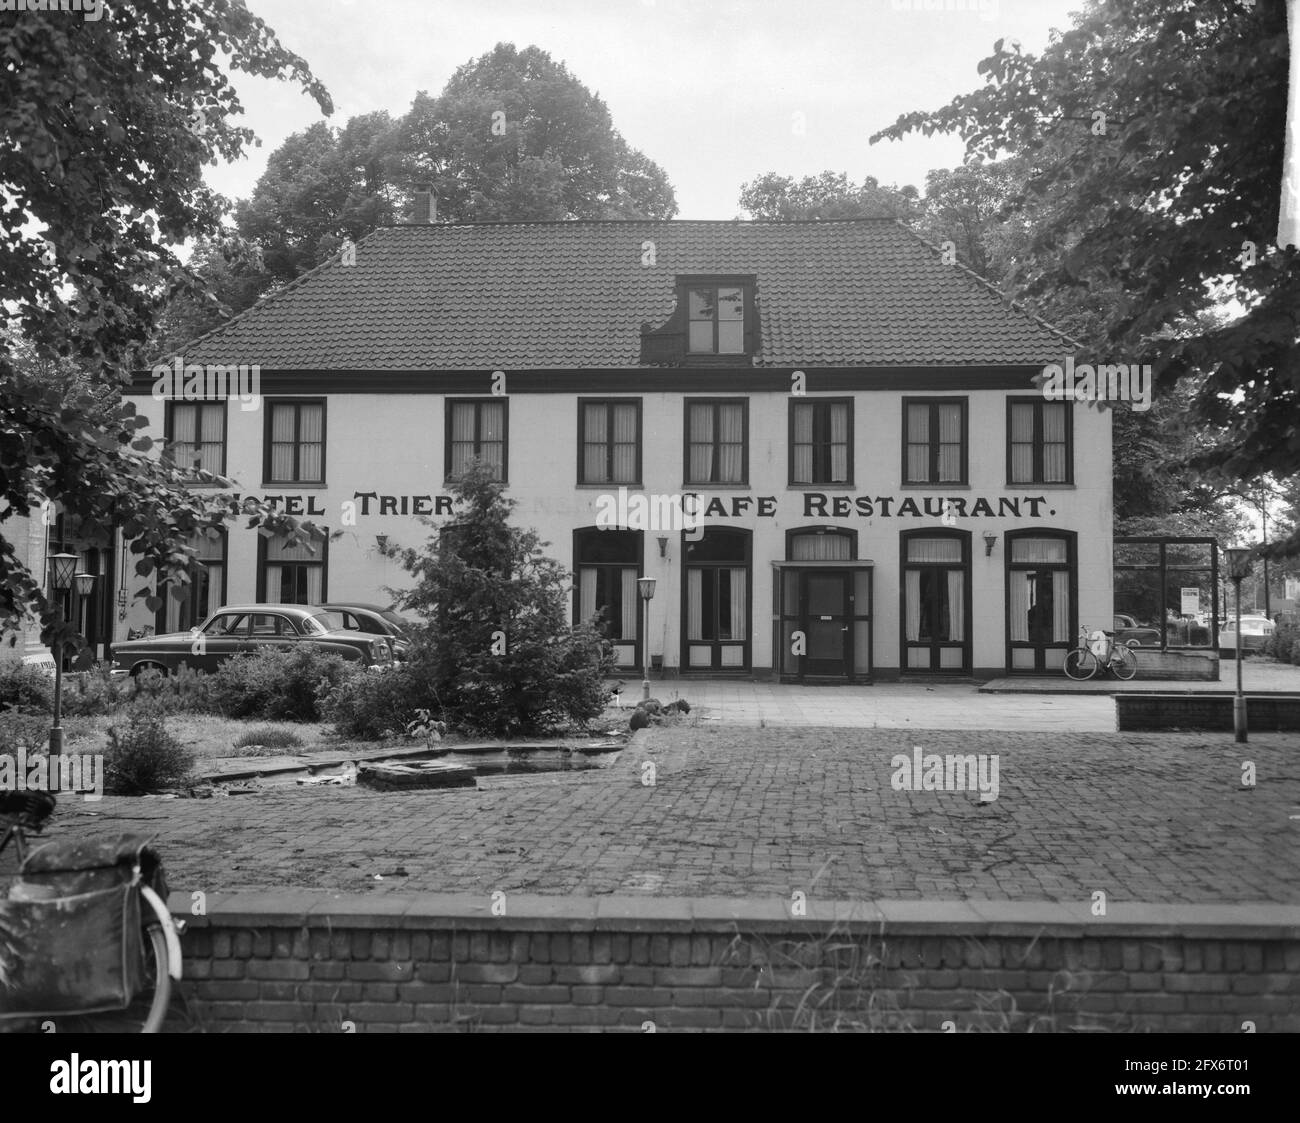 Hotel Trier in Soestdijk (auctioned), June 26, 1961, The Netherlands, 20th century press agency photo, news to remember, documentary, historic photography 1945-1990, visual stories, human history of the Twentieth Century, capturing moments in time Stock Photo